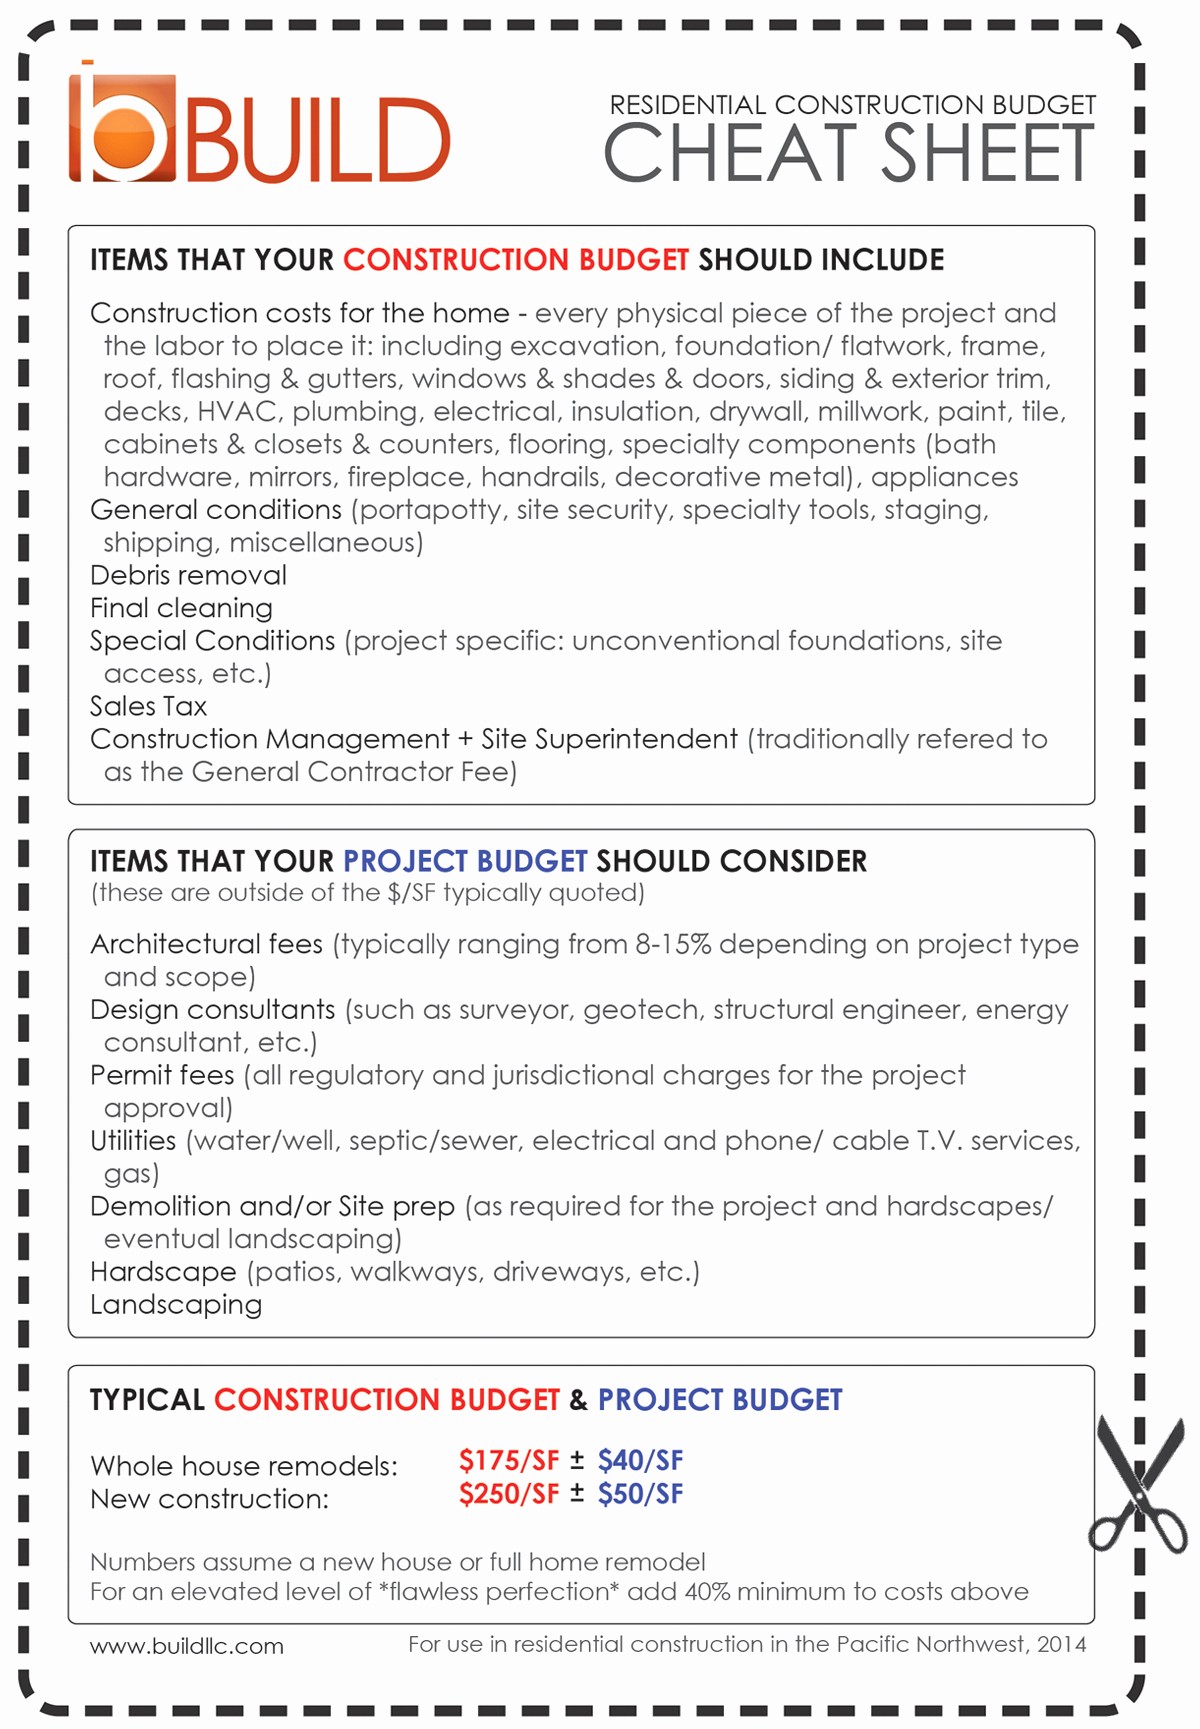 Building A House Budget Sheet Luxury Defining A Construction Bud the 2014 Cheat Sheet